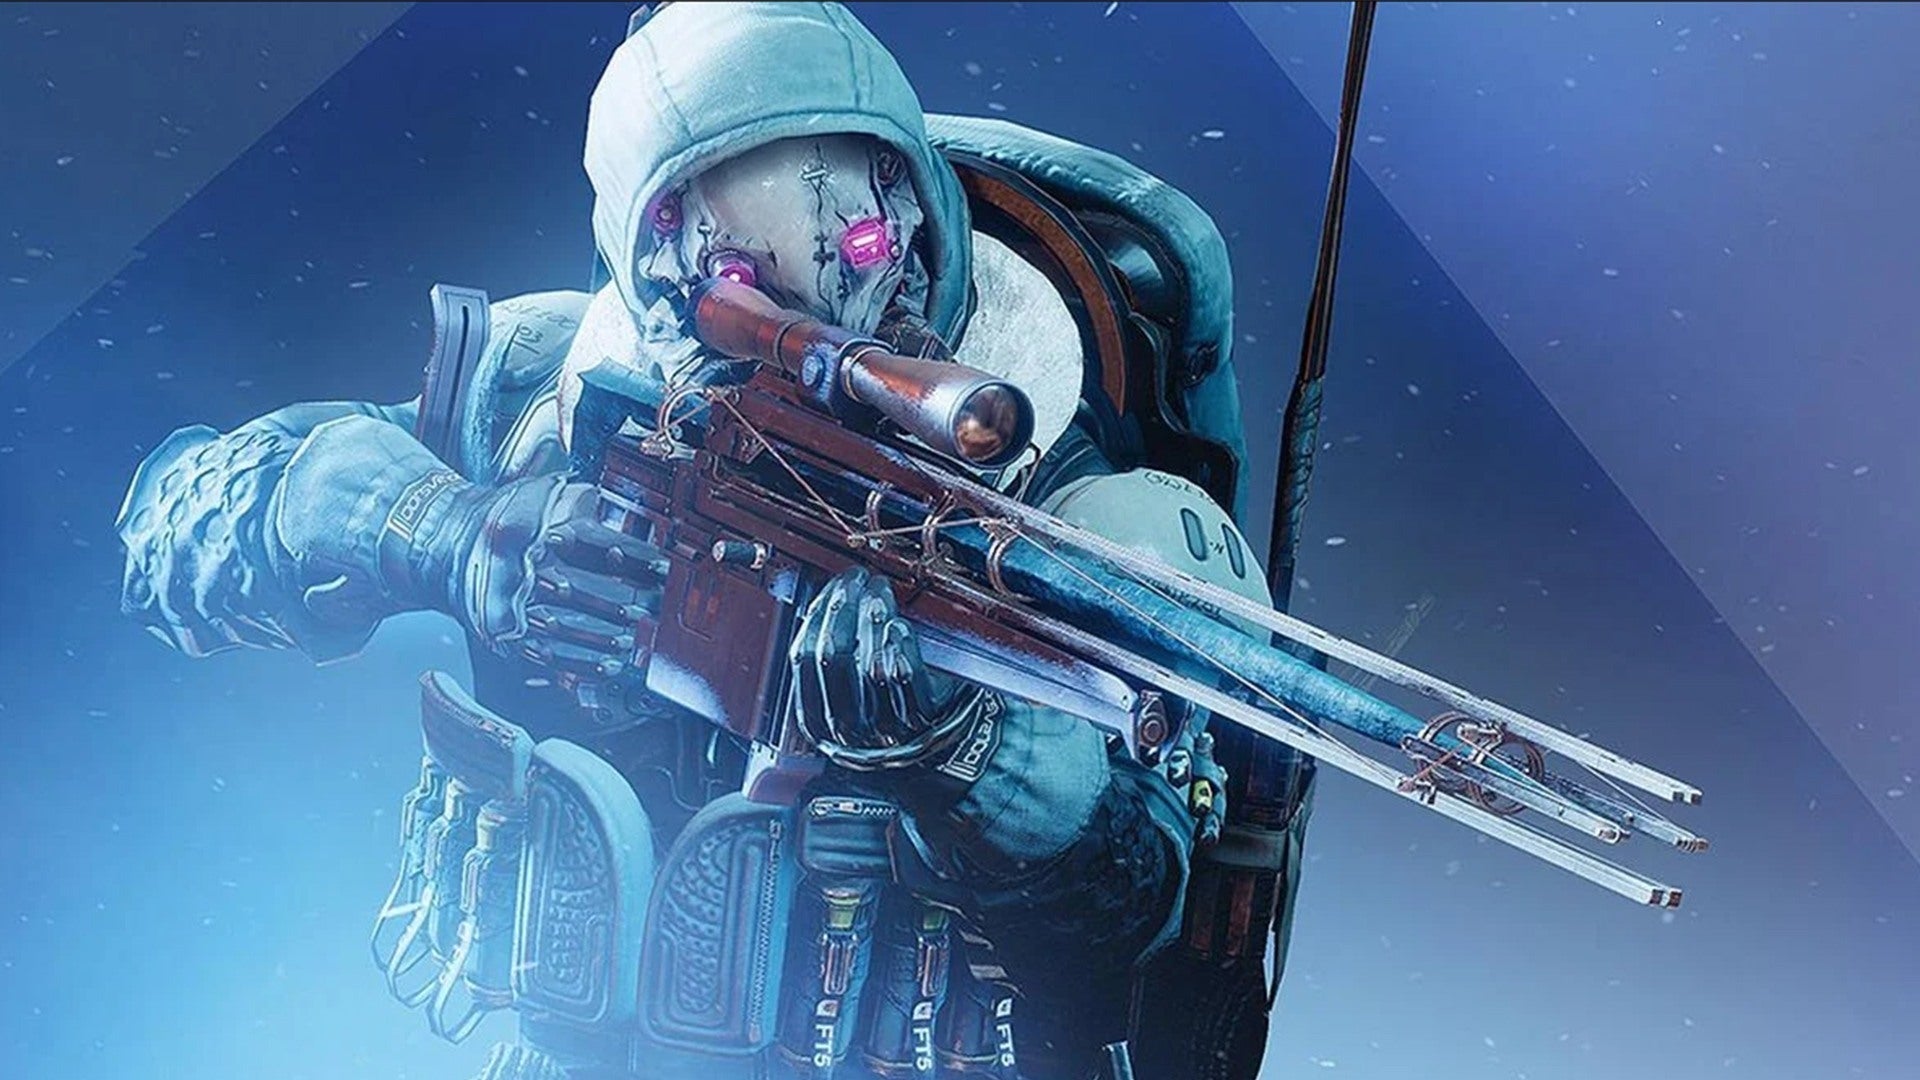 <h3>24. Destiny 2</h3>Destiny 2's new seasonal model was met with a bit of hesitance at first, but what Bungie has delivered is instead a compelling narrative that intertwines story beats from season to season. The fact that it has been added to Game Pass only sweetens the deal bringing more players into the fold. Whether you're looking to push back the darkness with Stasis or just shoot things with cool guns Destiny has proven the test of time and keeps players coming back.